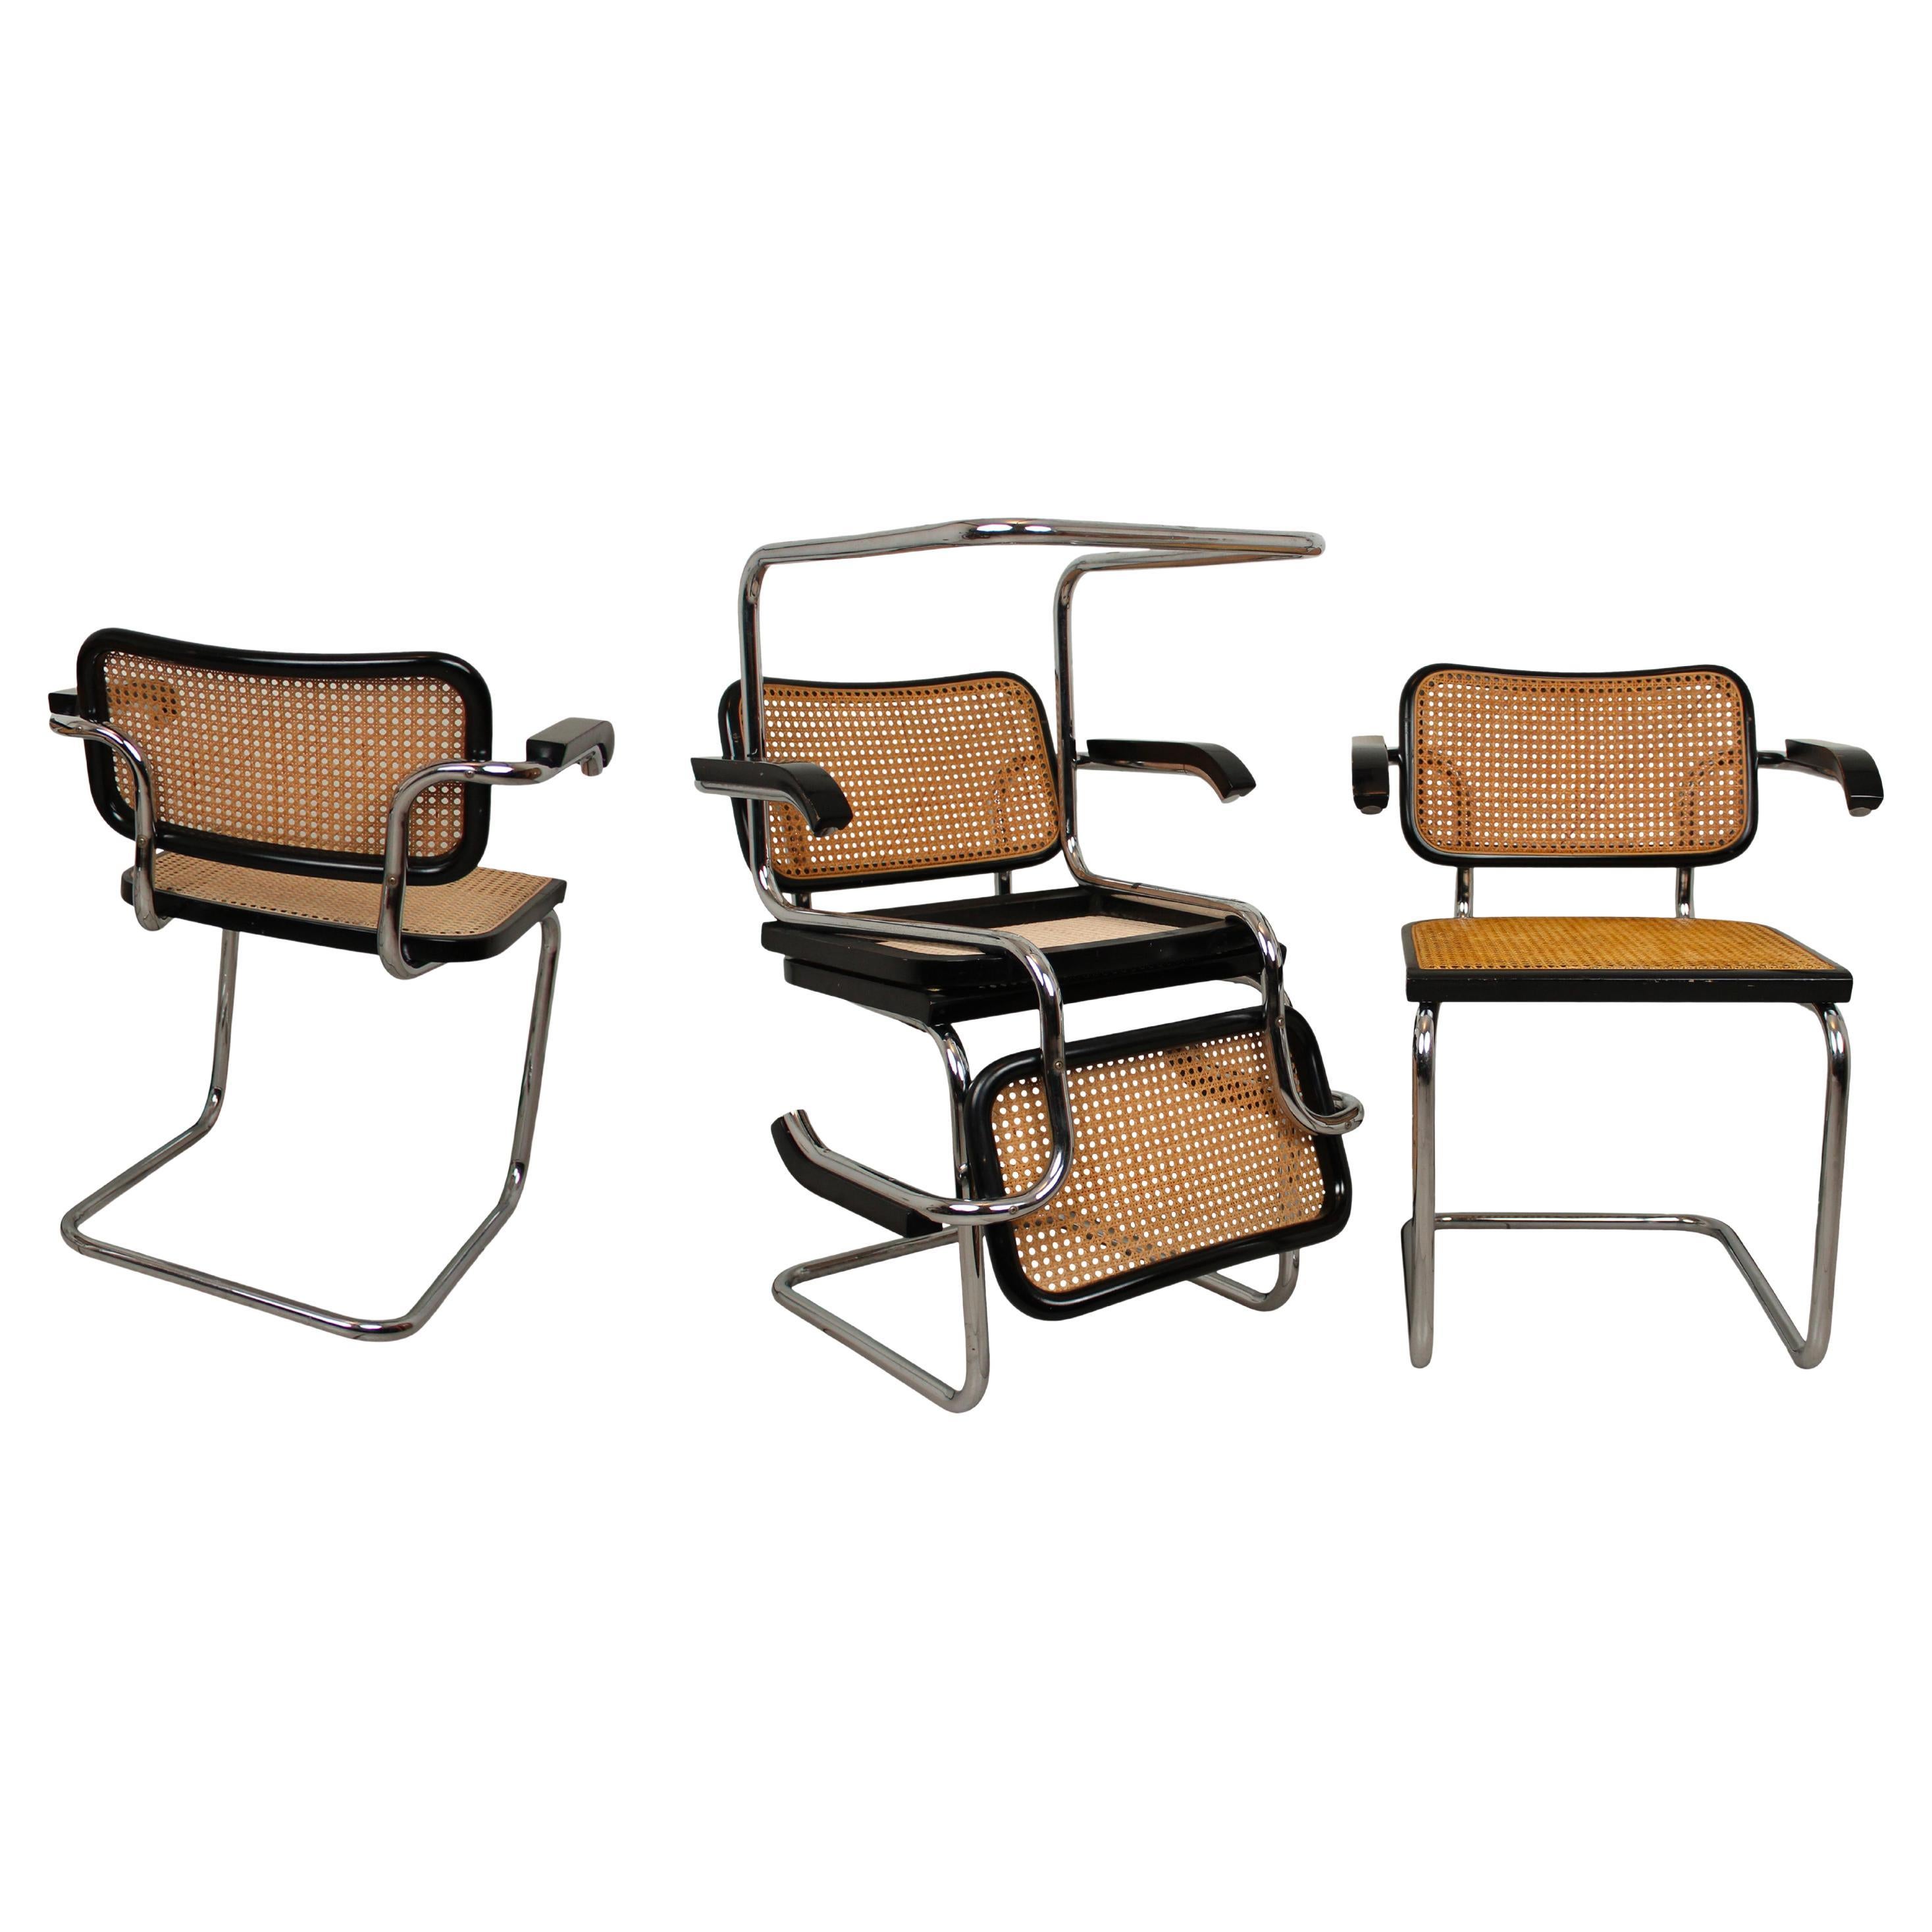 Beautiful set of 4 original B64 “Cesca” dining chairs produced by Gavina in 1968.
Cesca chairs were originally designed in 1928 by French Hungarian architect Marcel Breuer and named after his daughter Francesca.
Gavina was the official Italian